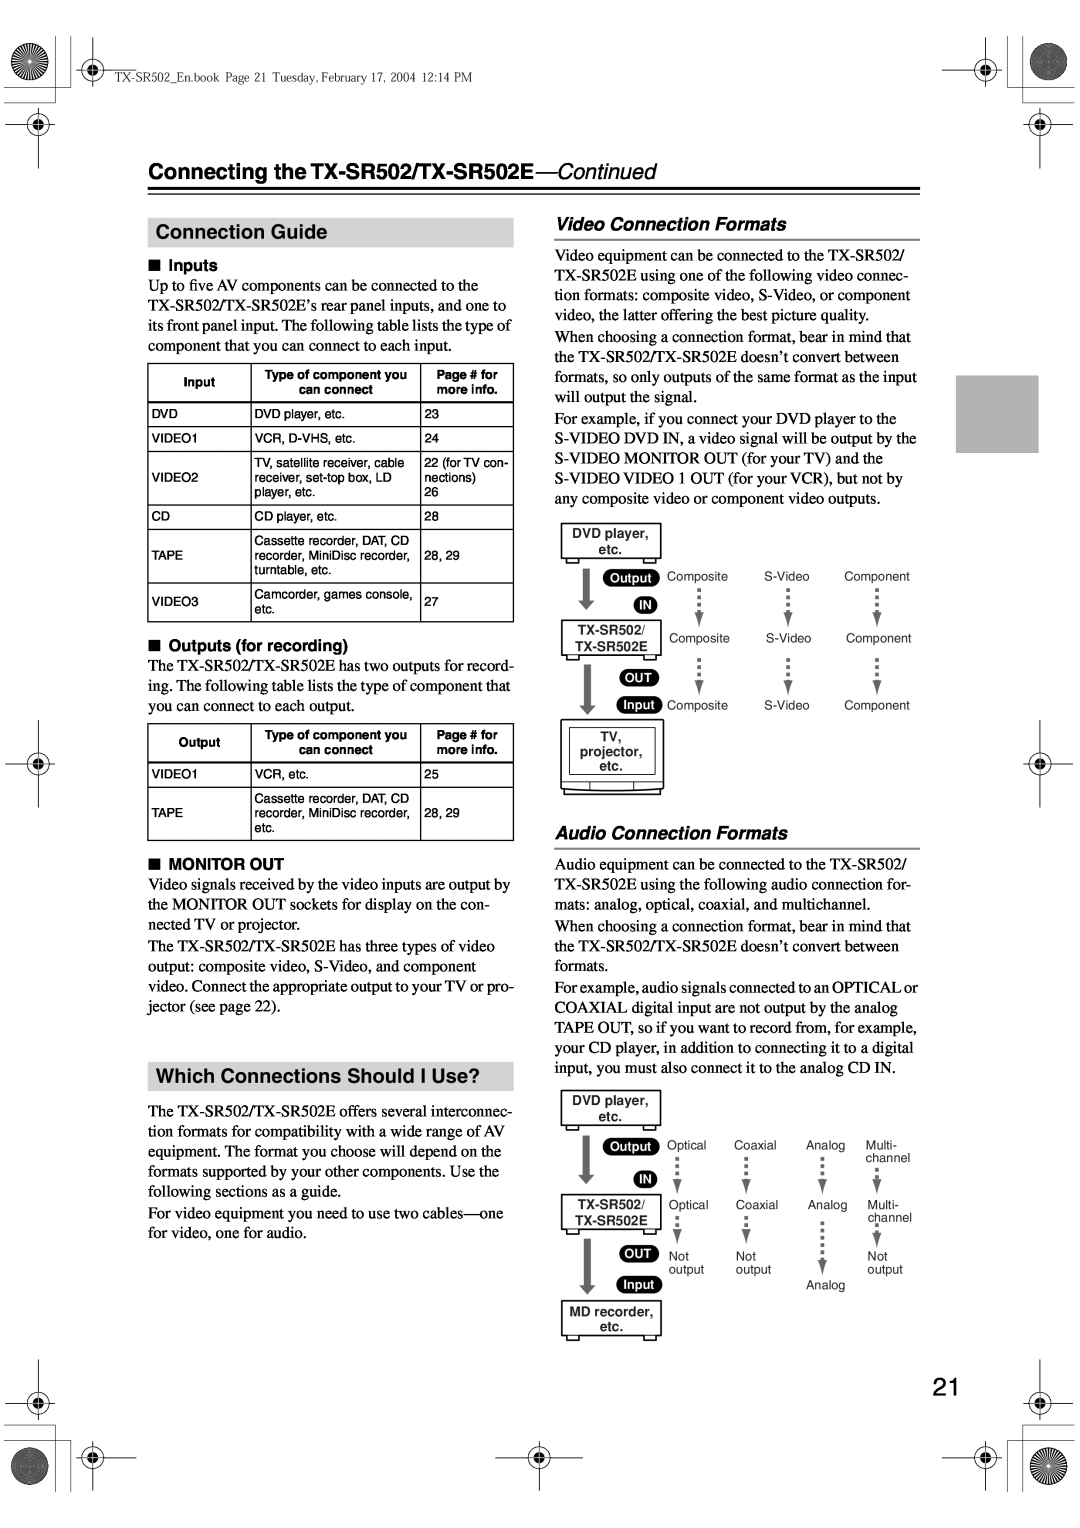 Onkyo instruction manual Connecting the TX-SR502/TX-SR502E-Continued, Connection Guide, Which Connections Should I Use? 